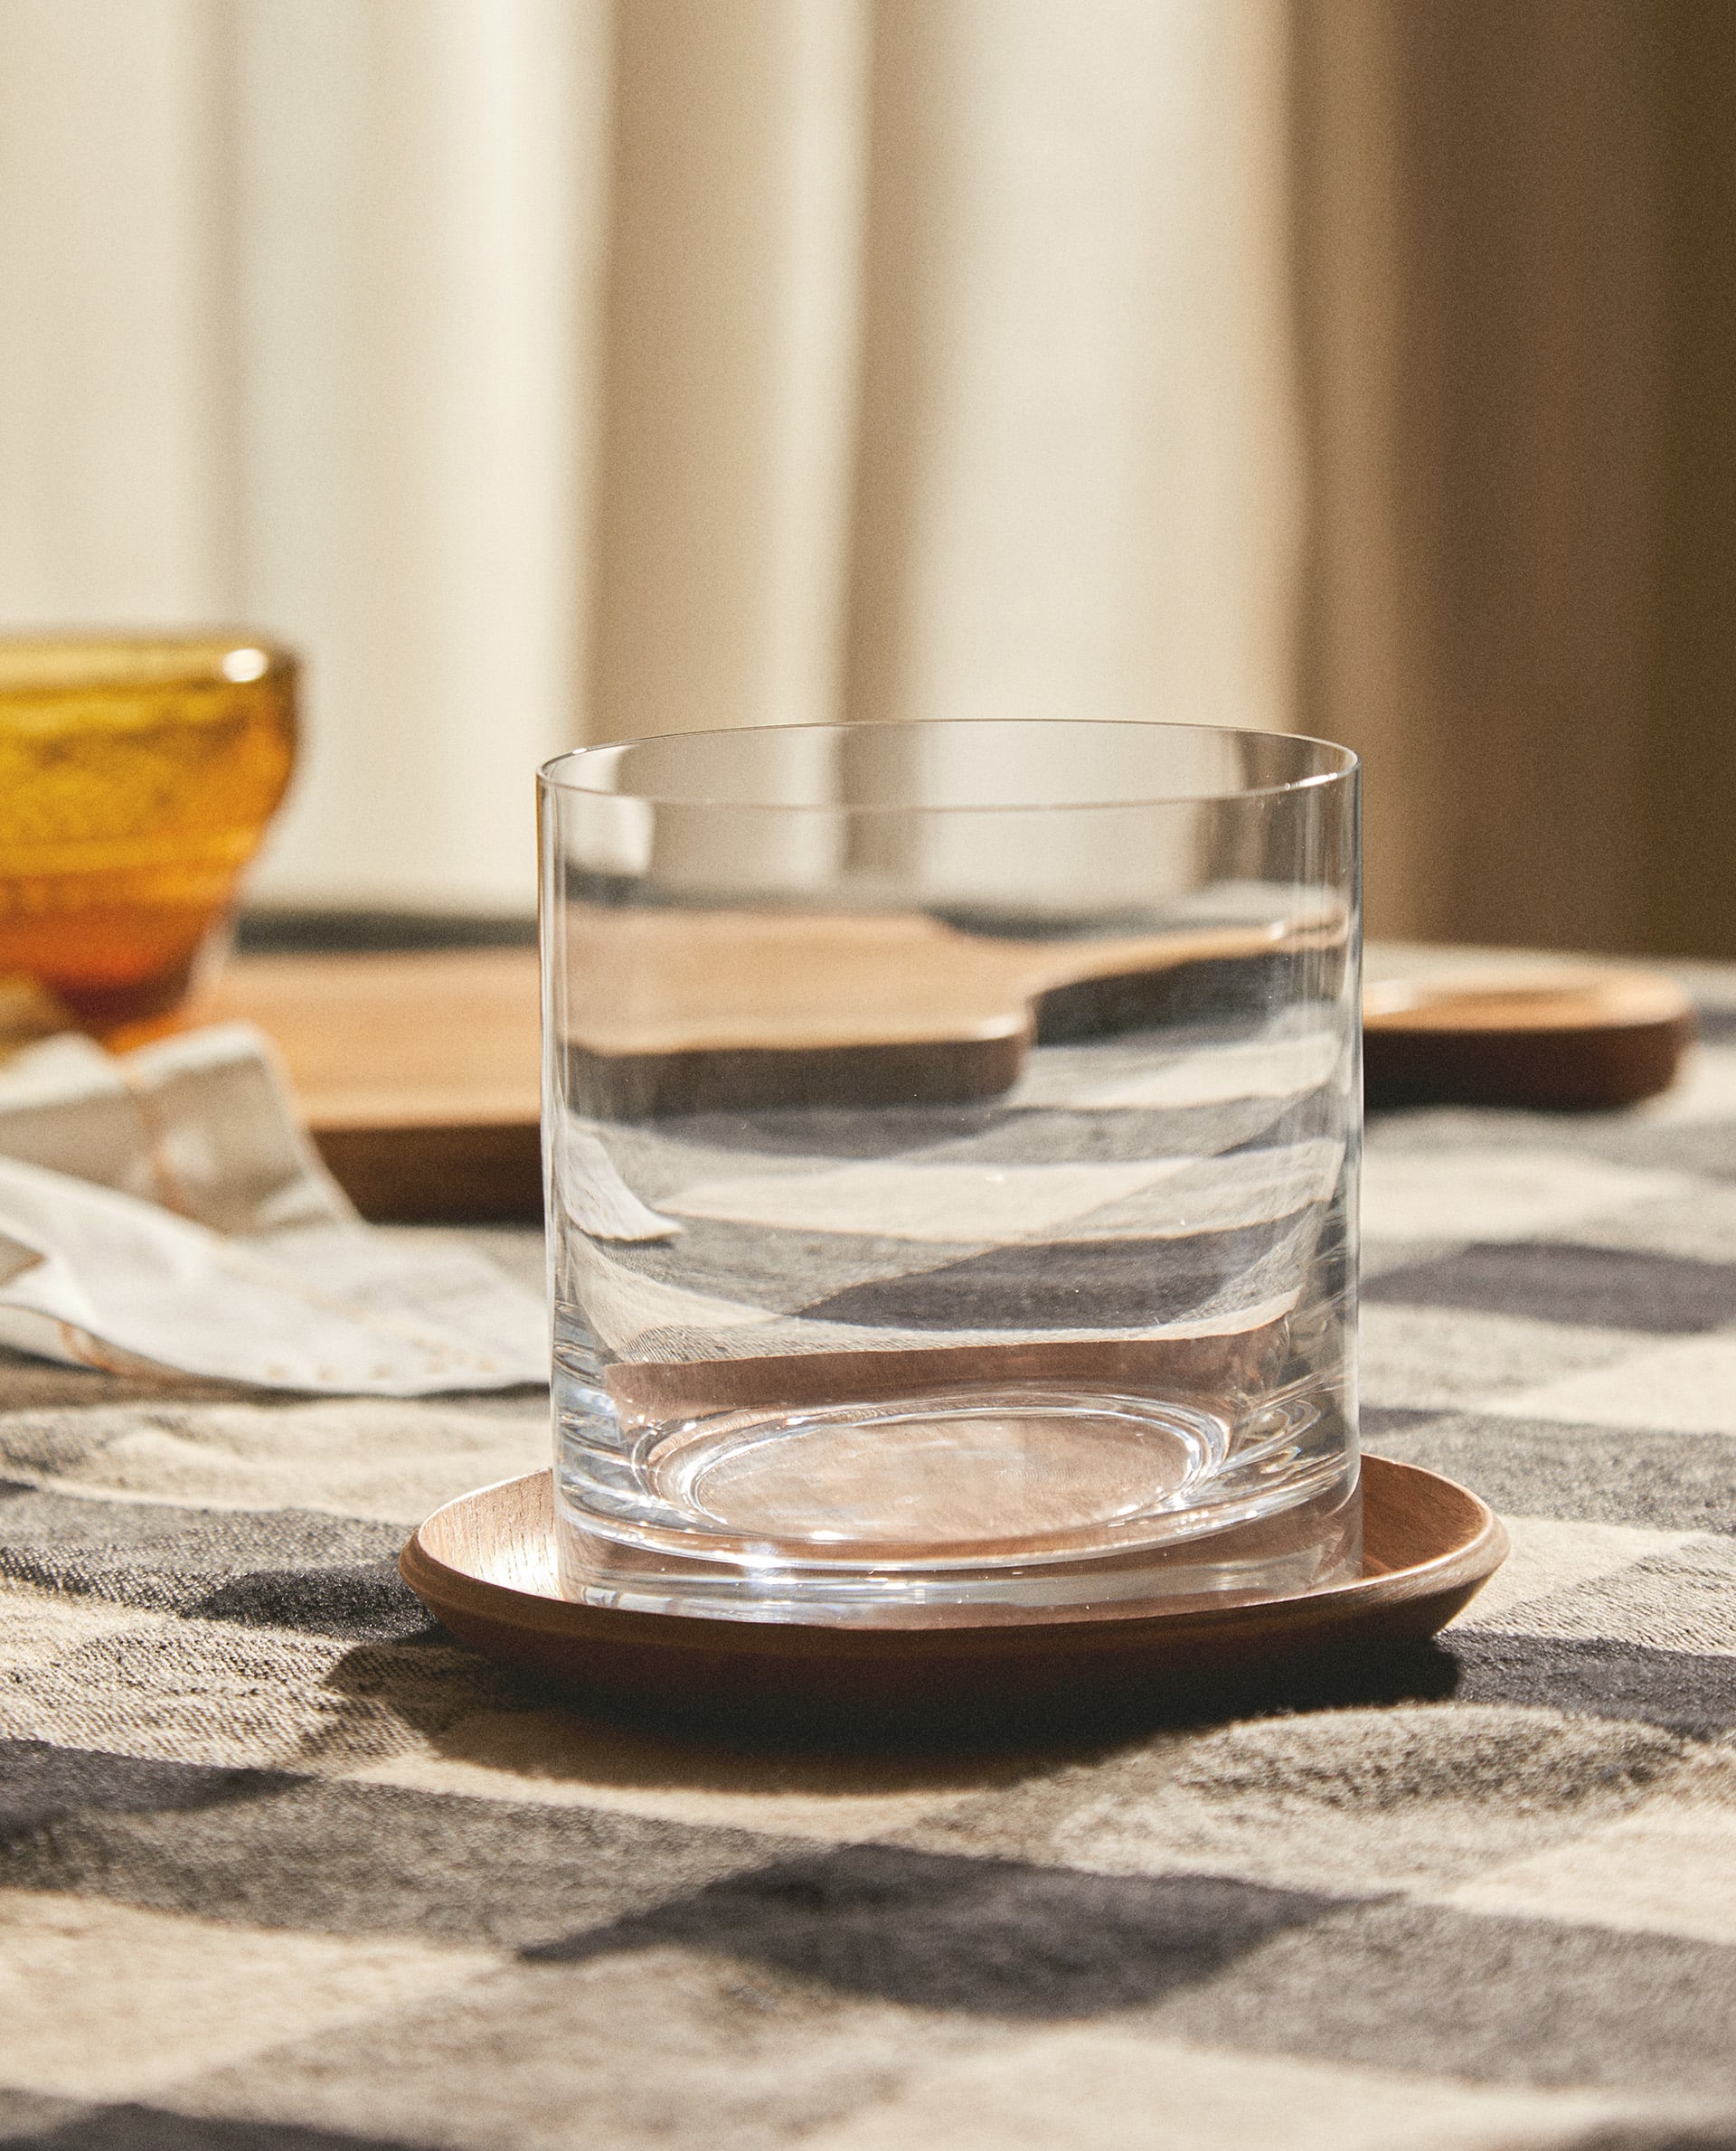 Elegant whiskey glass with wide bowl enhancing rich whiskey aromas